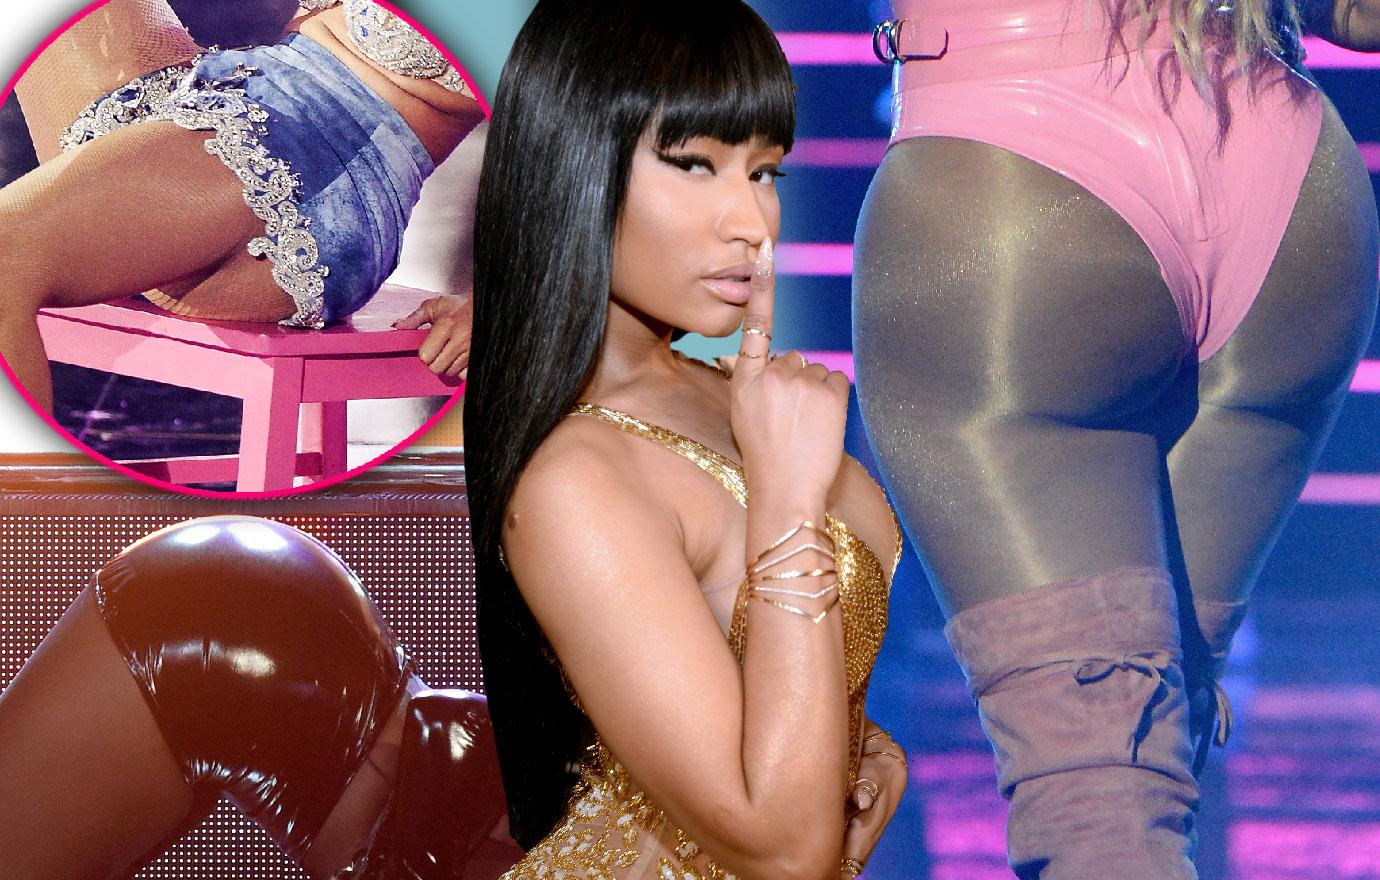 click to read more about Nicki Minaj’s skimpiest booty scandals. 